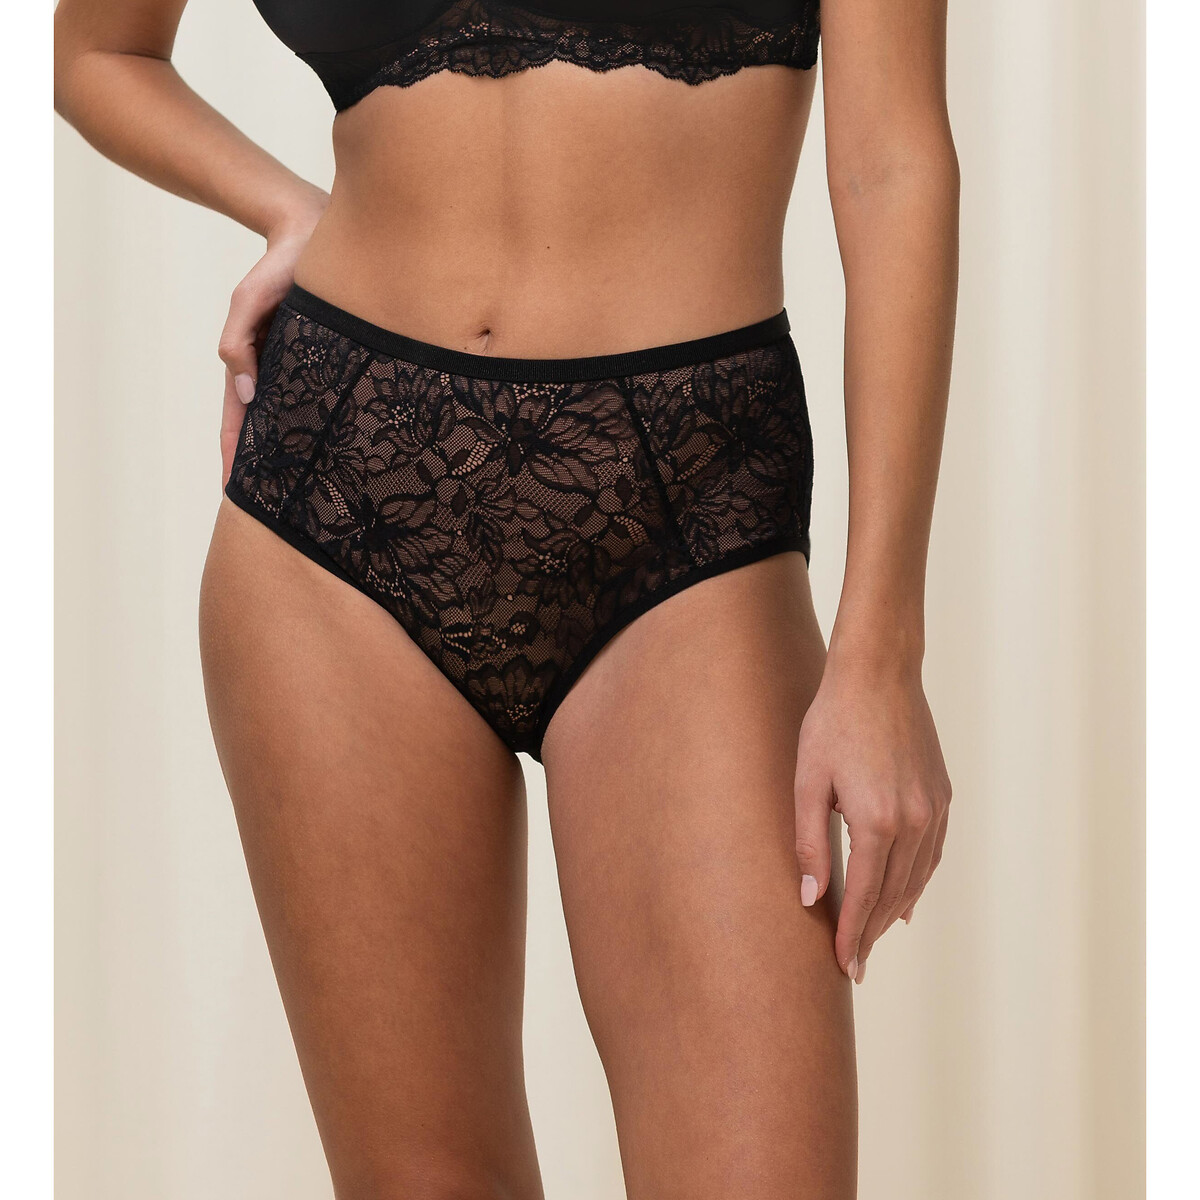 Amourette Charm Maxi Knickers